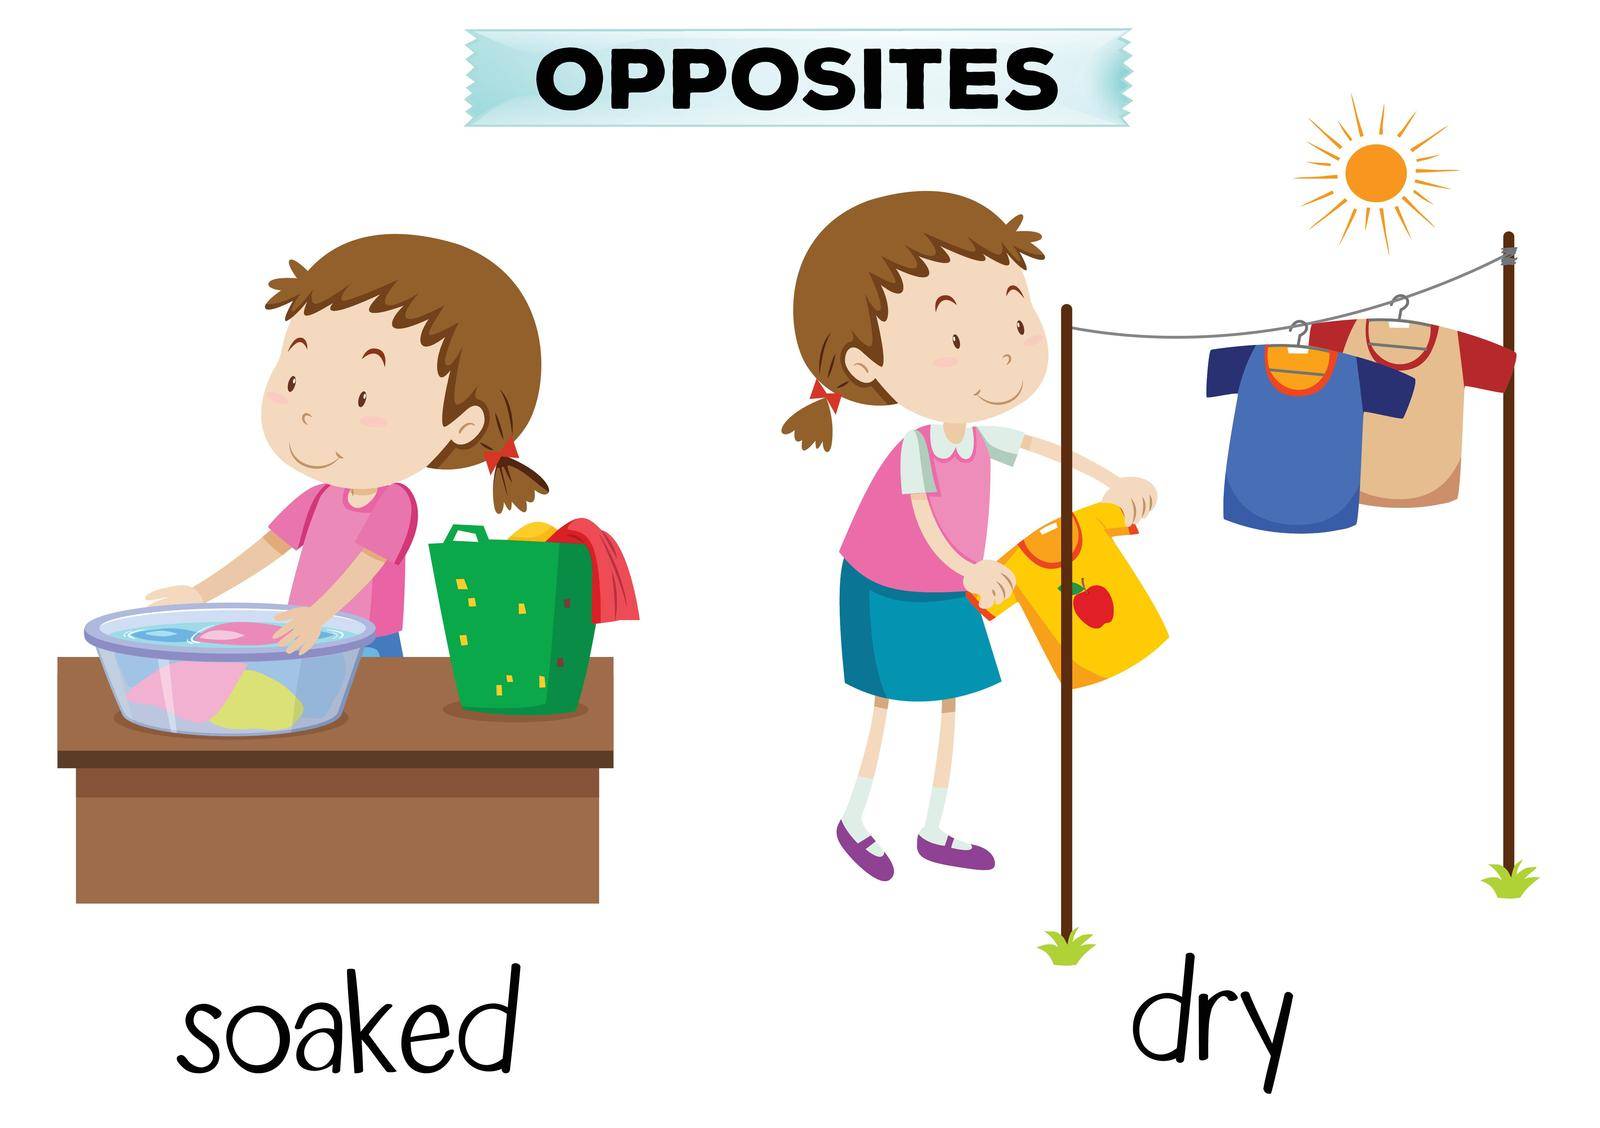 English opposite word soaked and dry illustration